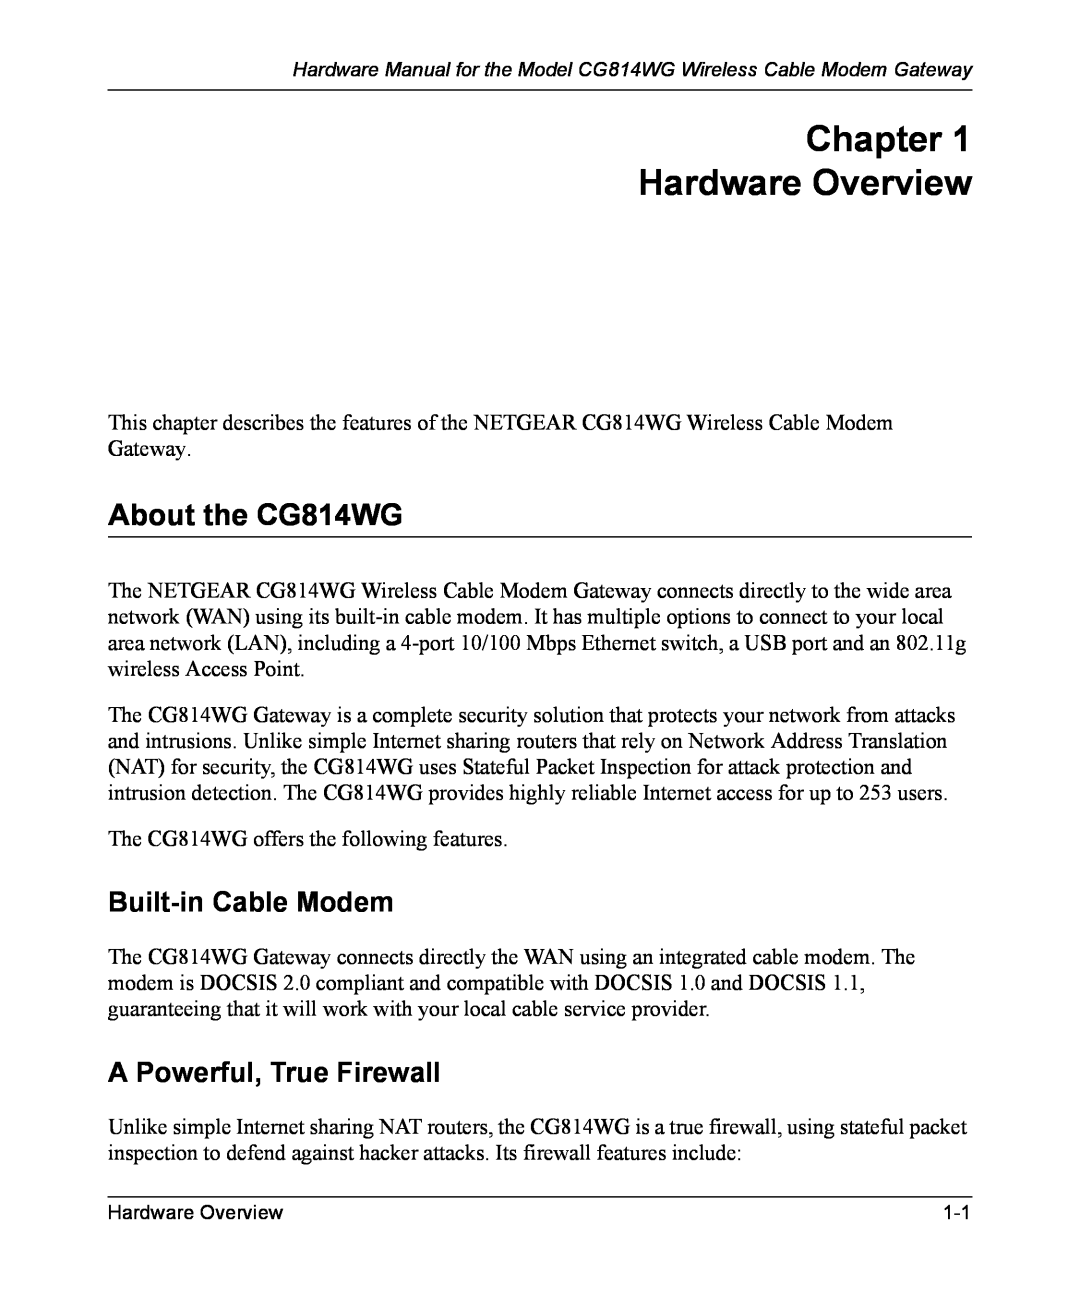 NETGEAR manual Chapter Hardware Overview, About the CG814WG, Built-in Cable Modem, A Powerful, True Firewall 